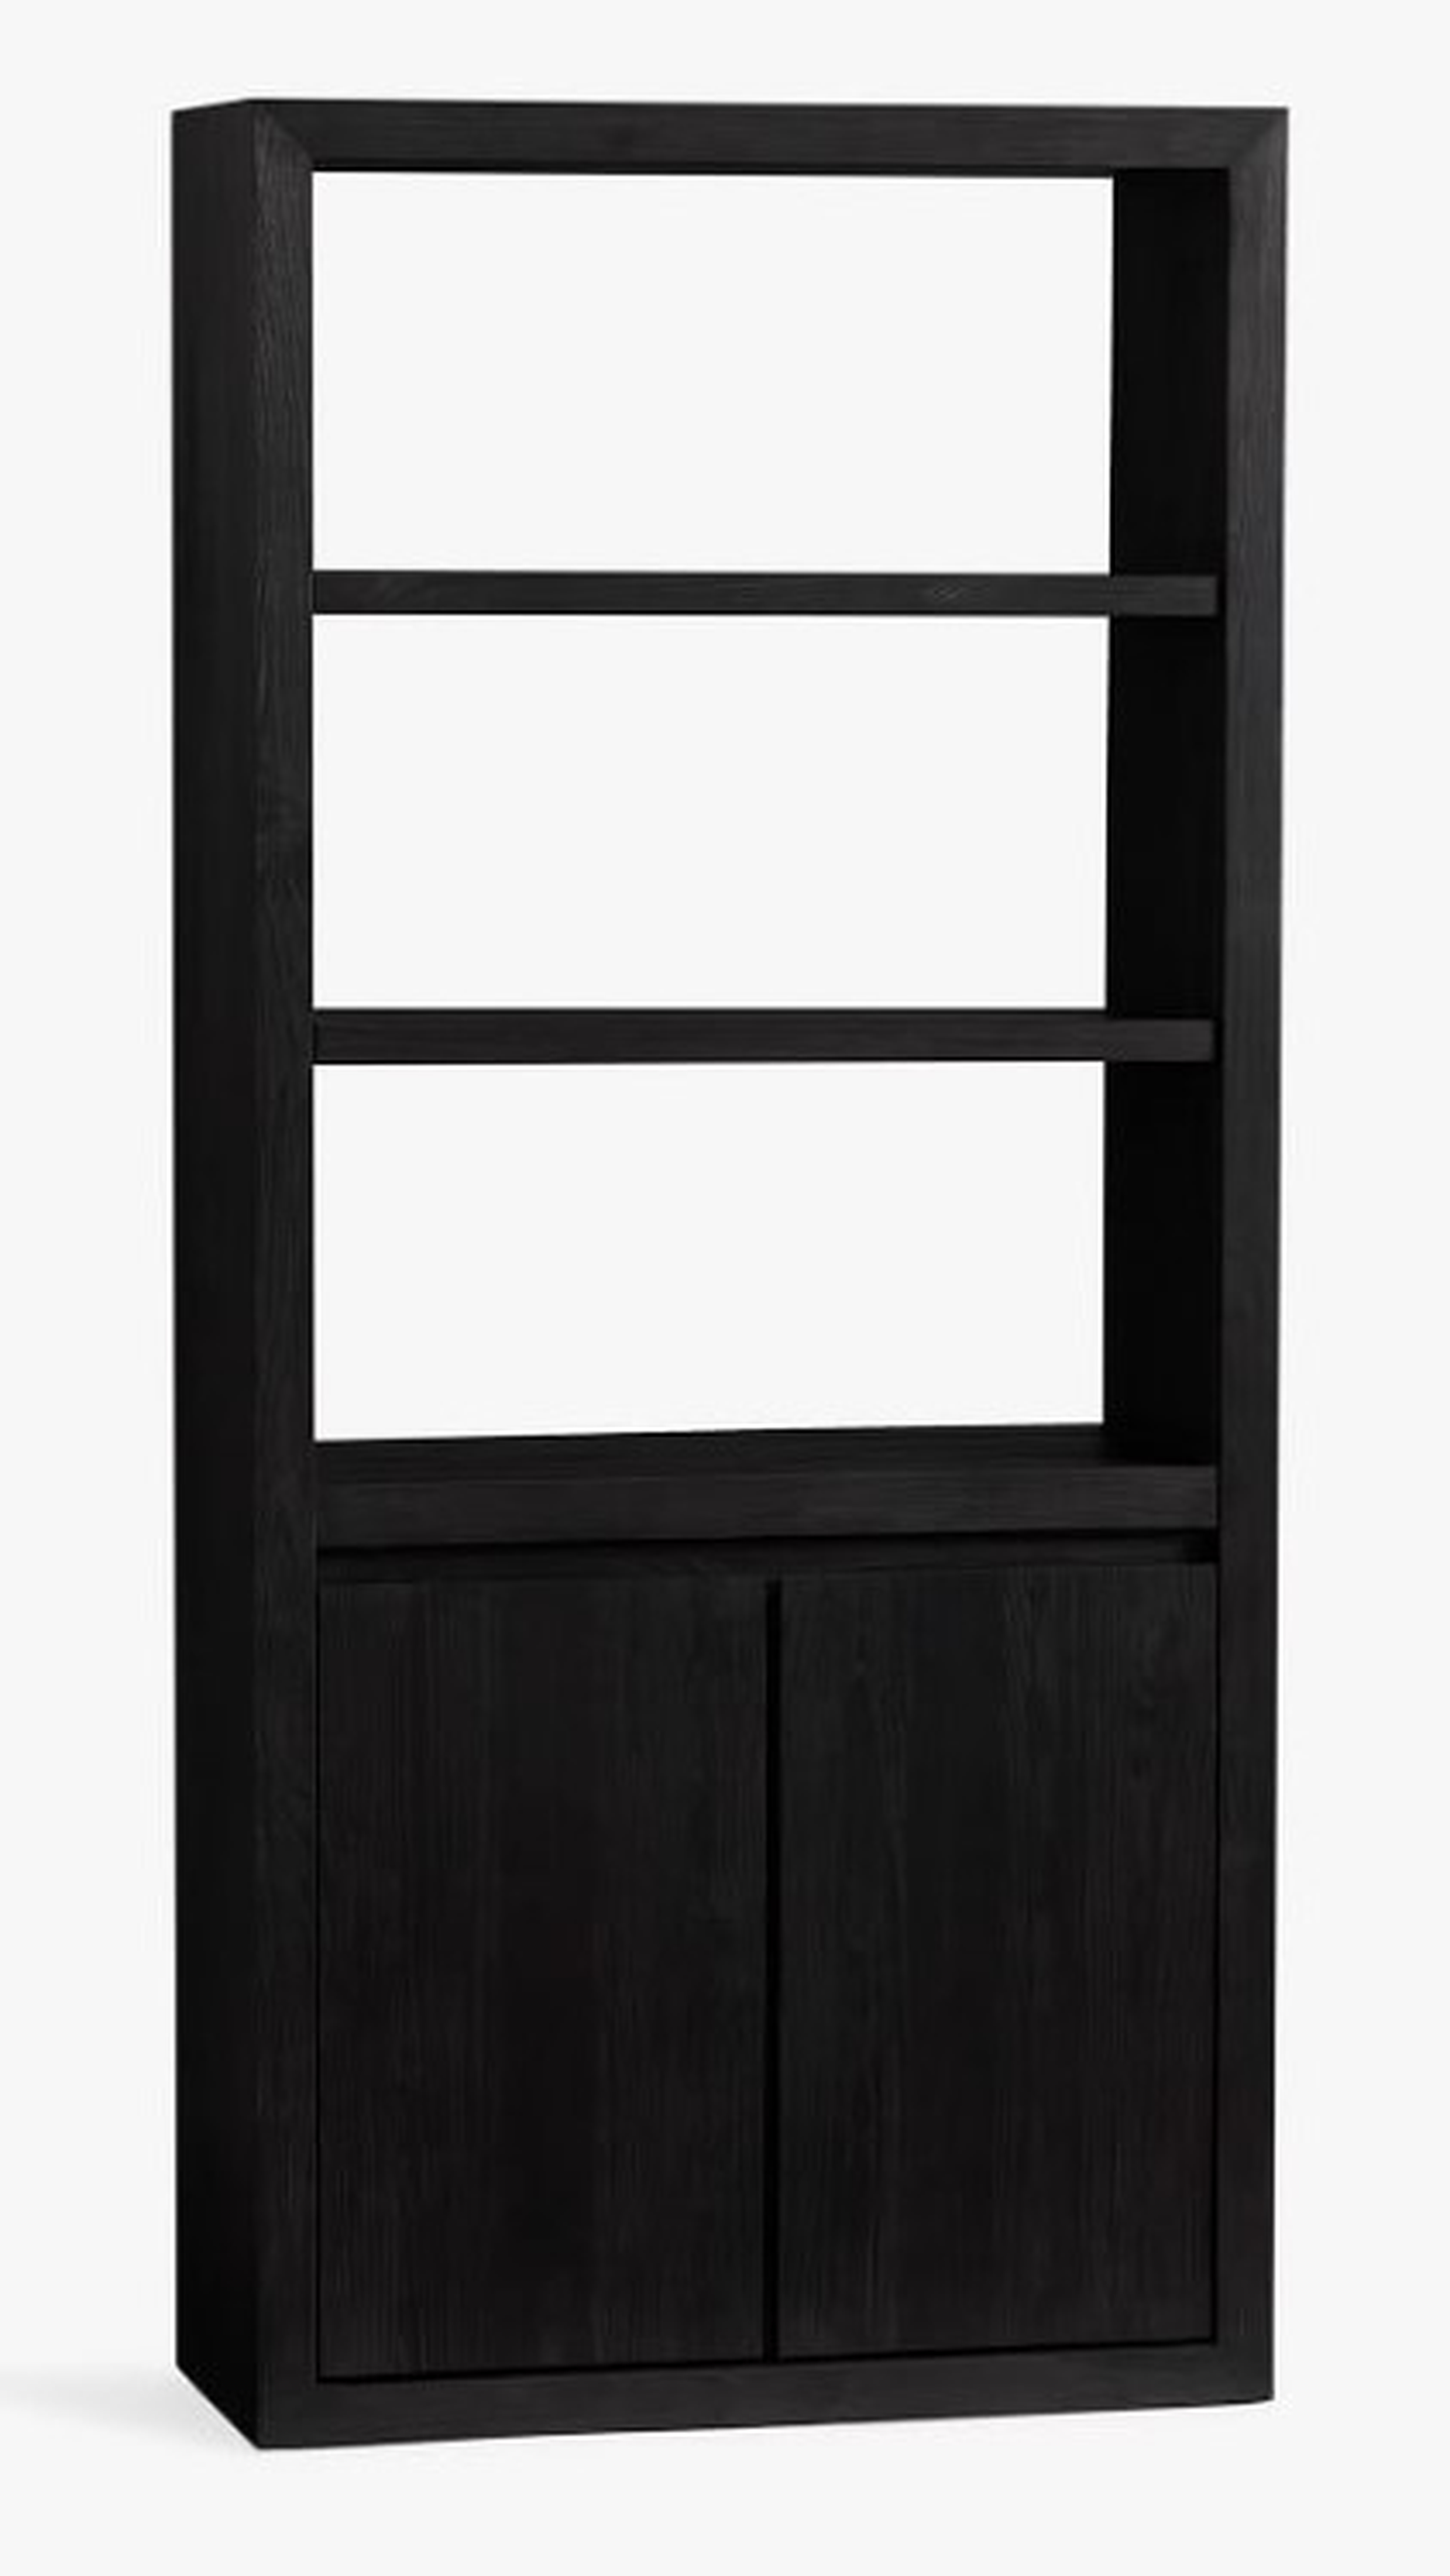 Folsom 33" x 73" Open Bookcase with Doors, Charcoal - Pottery Barn